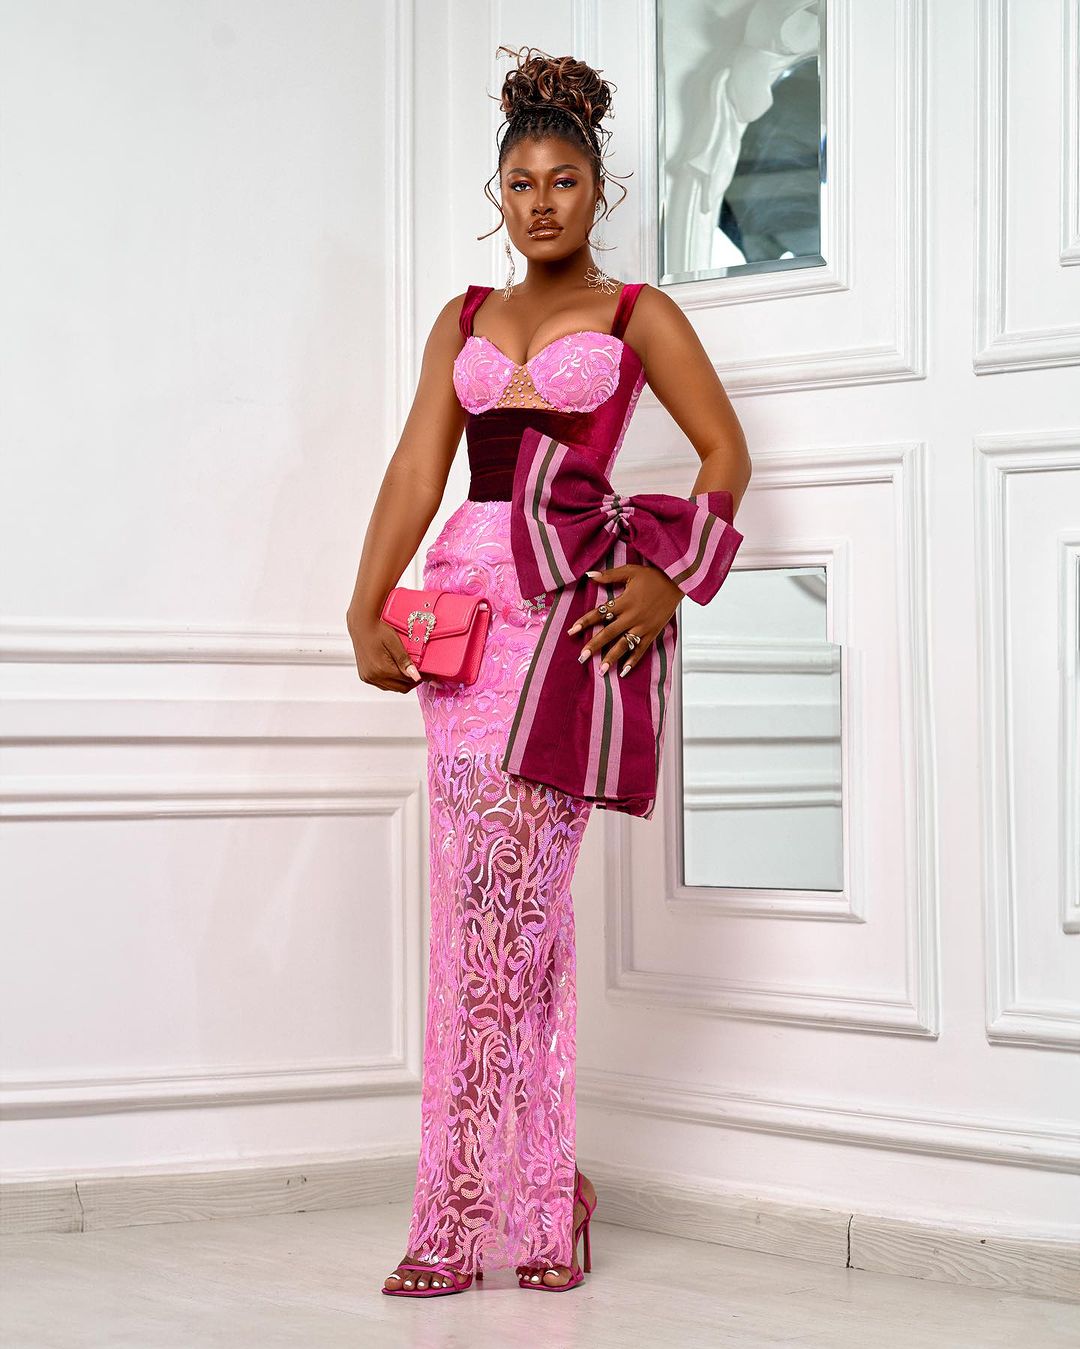 It’s Both Premium Appears or Nothing With These 10 AsoEbiBella Inspos! Test Them Out